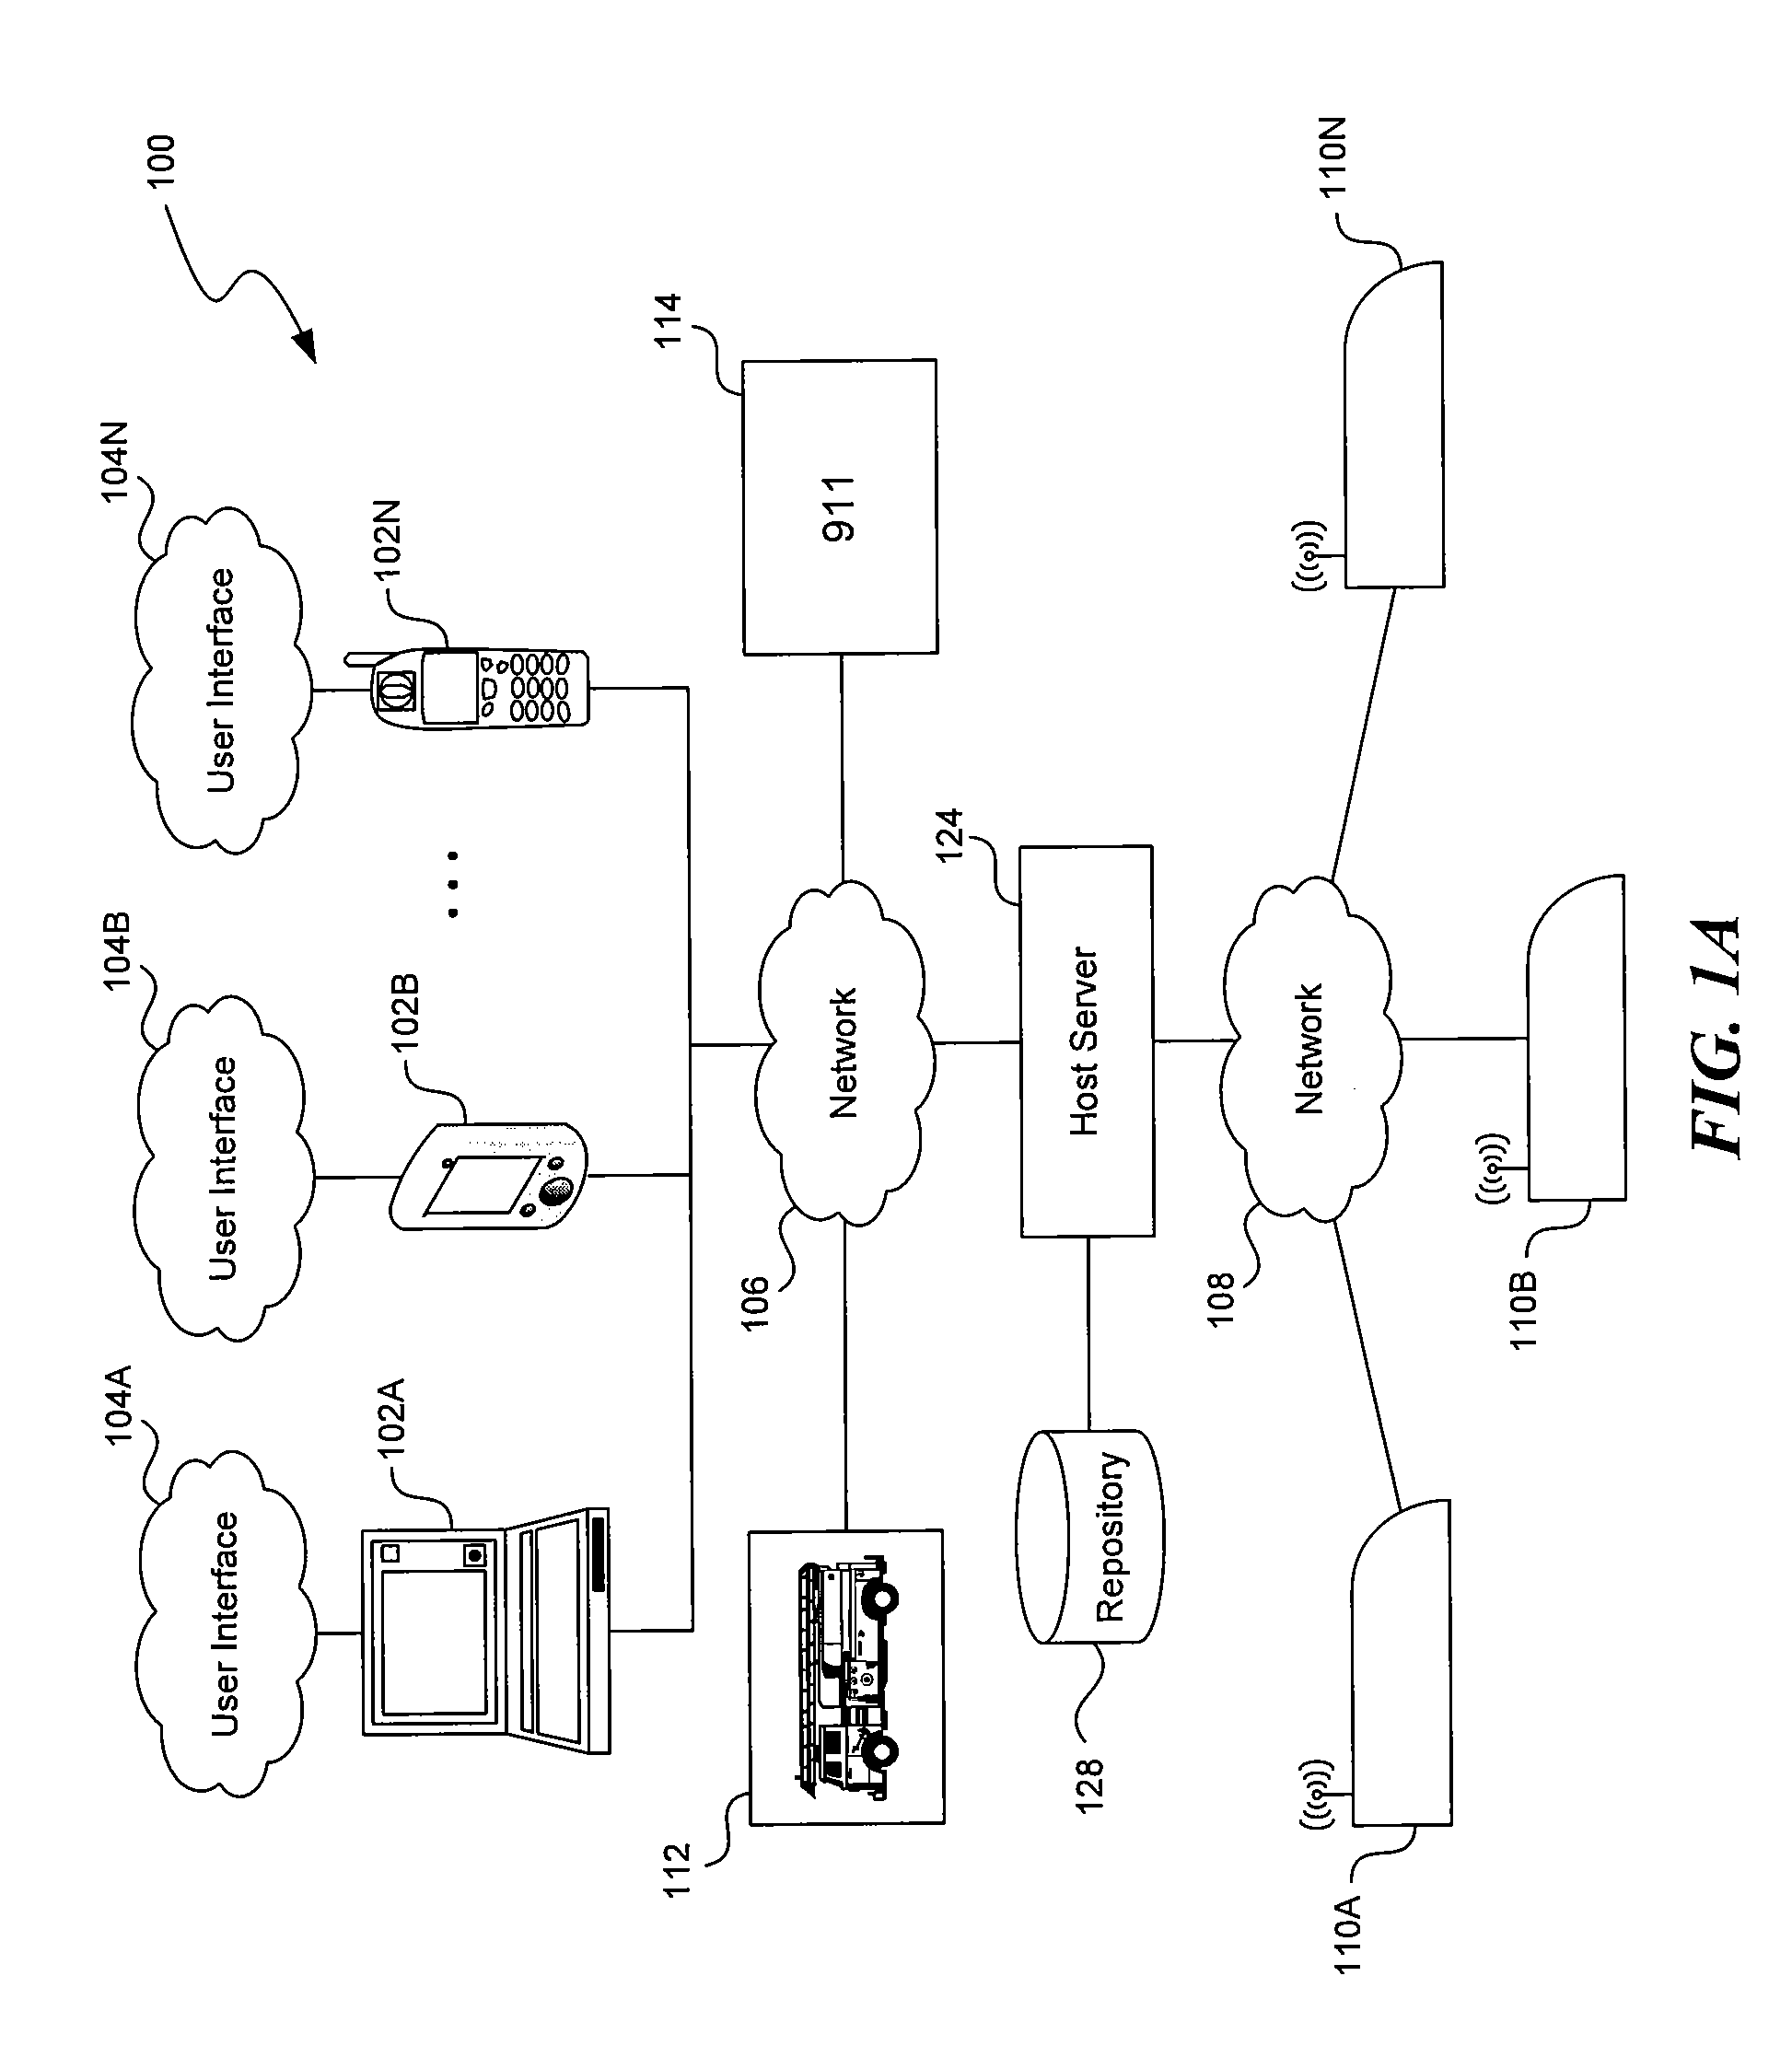 System and method for bandwidth optimization in data transmission using a surveillance device